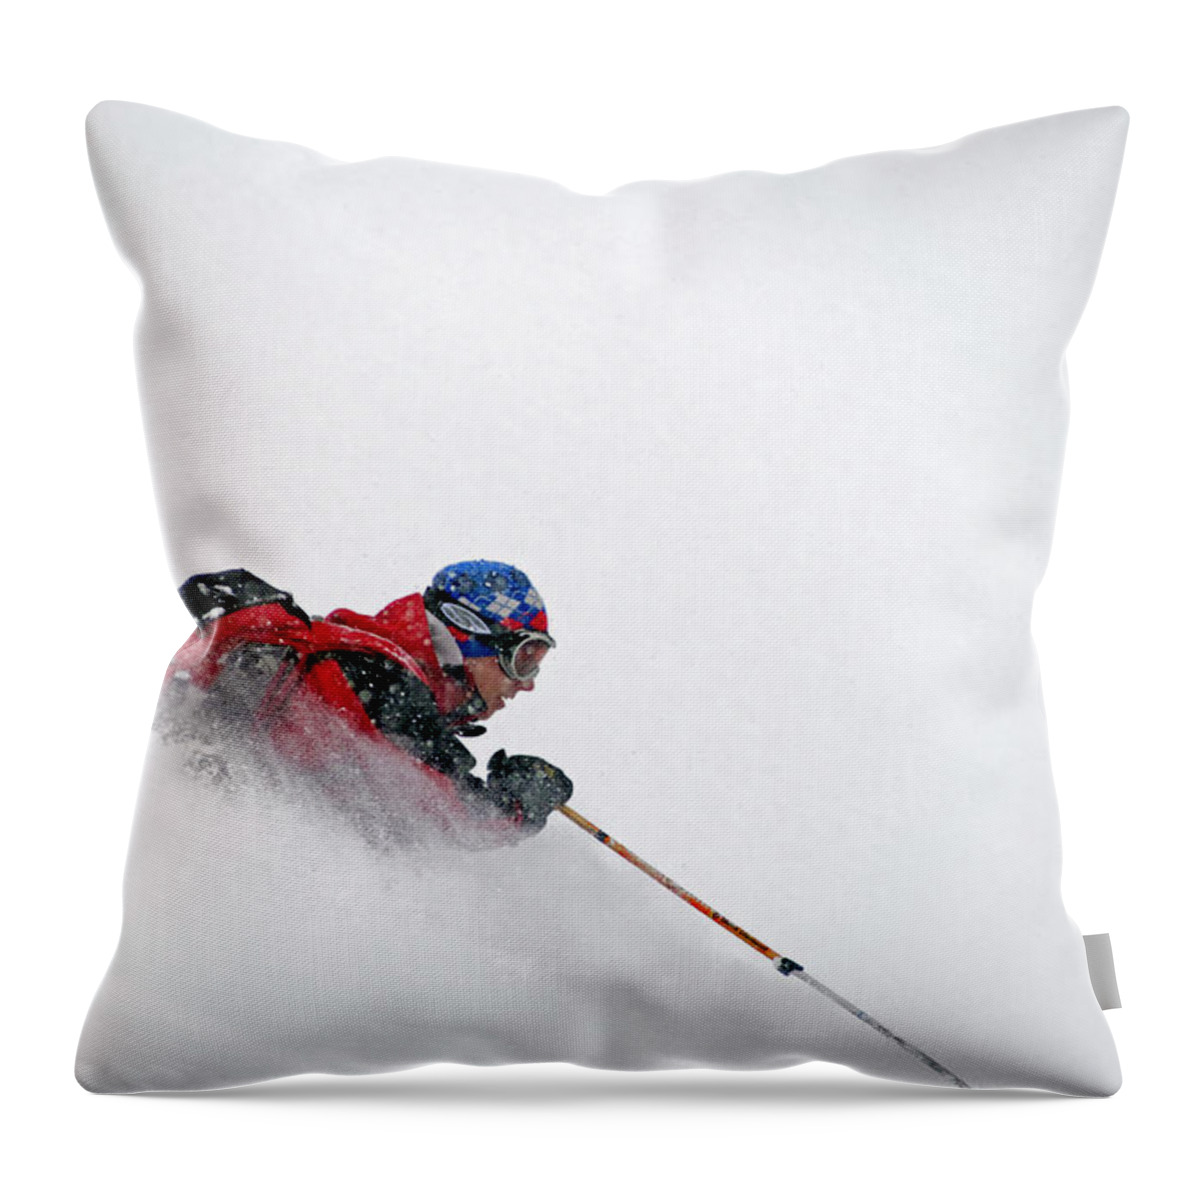 Skiing Throw Pillow featuring the photograph Man Telemark Skiing In The Backcountry by Daniel H. Bailey